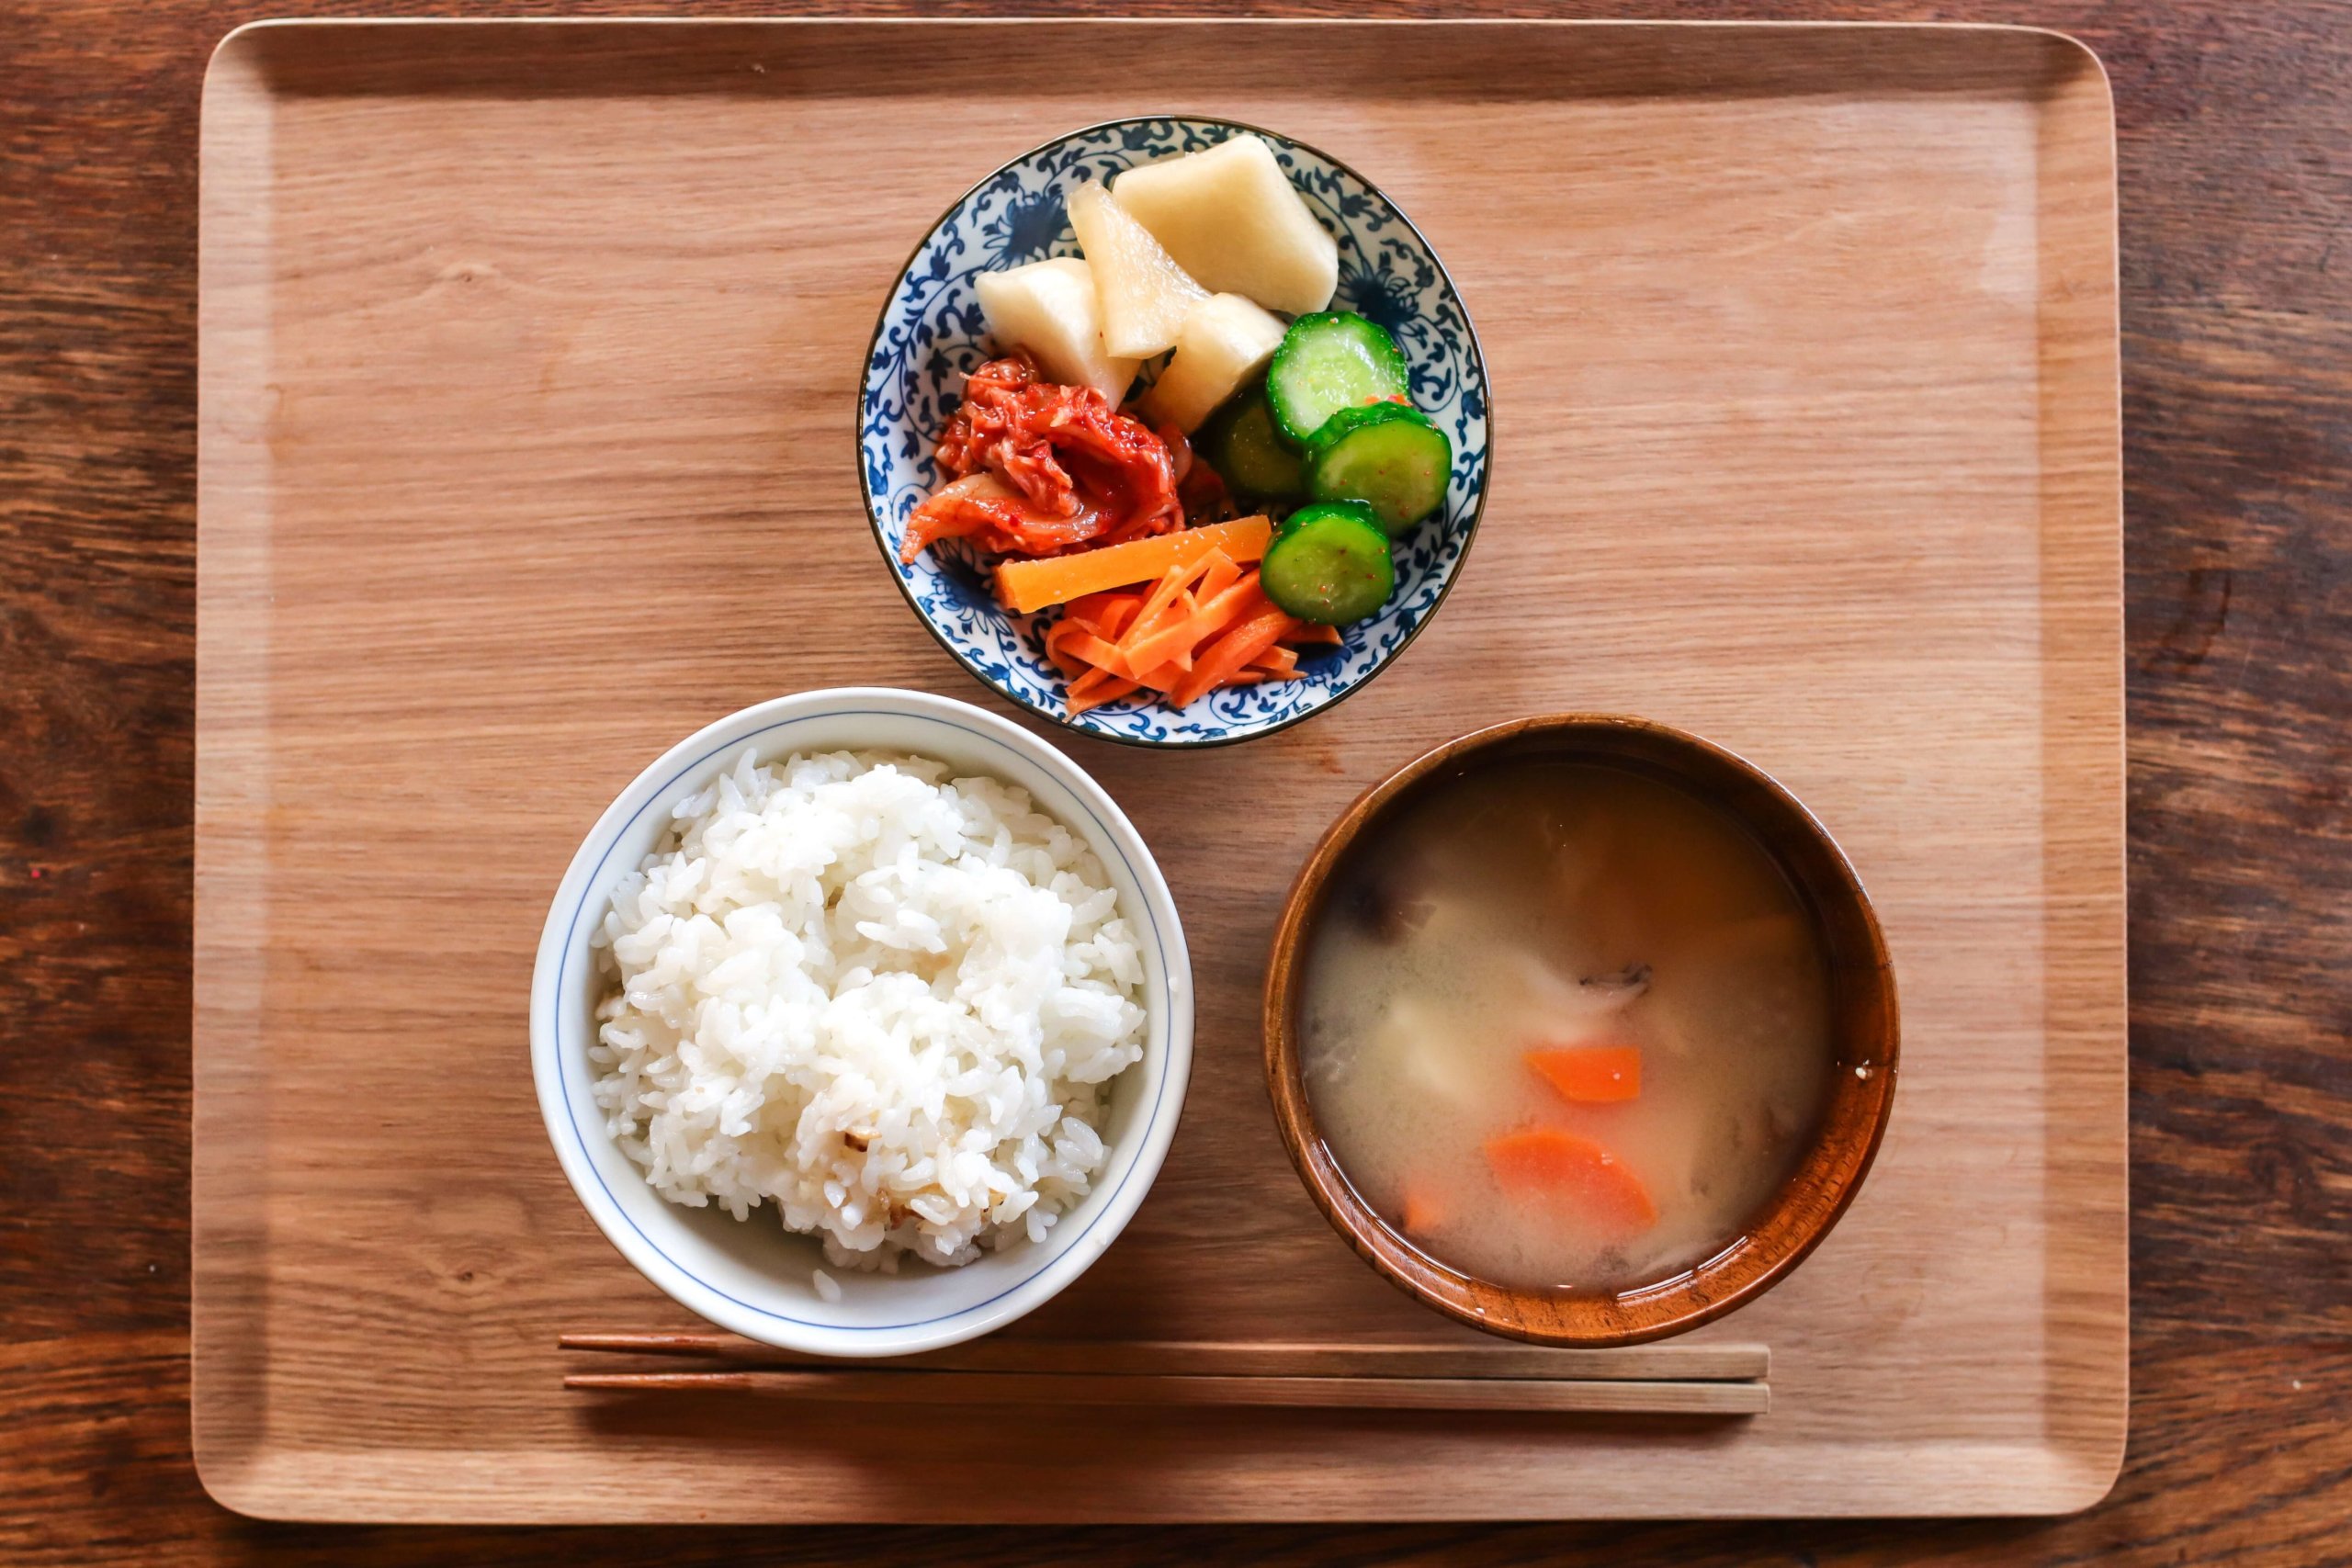 healthy japanese food including rice, miso shiru (soup) and vegetables